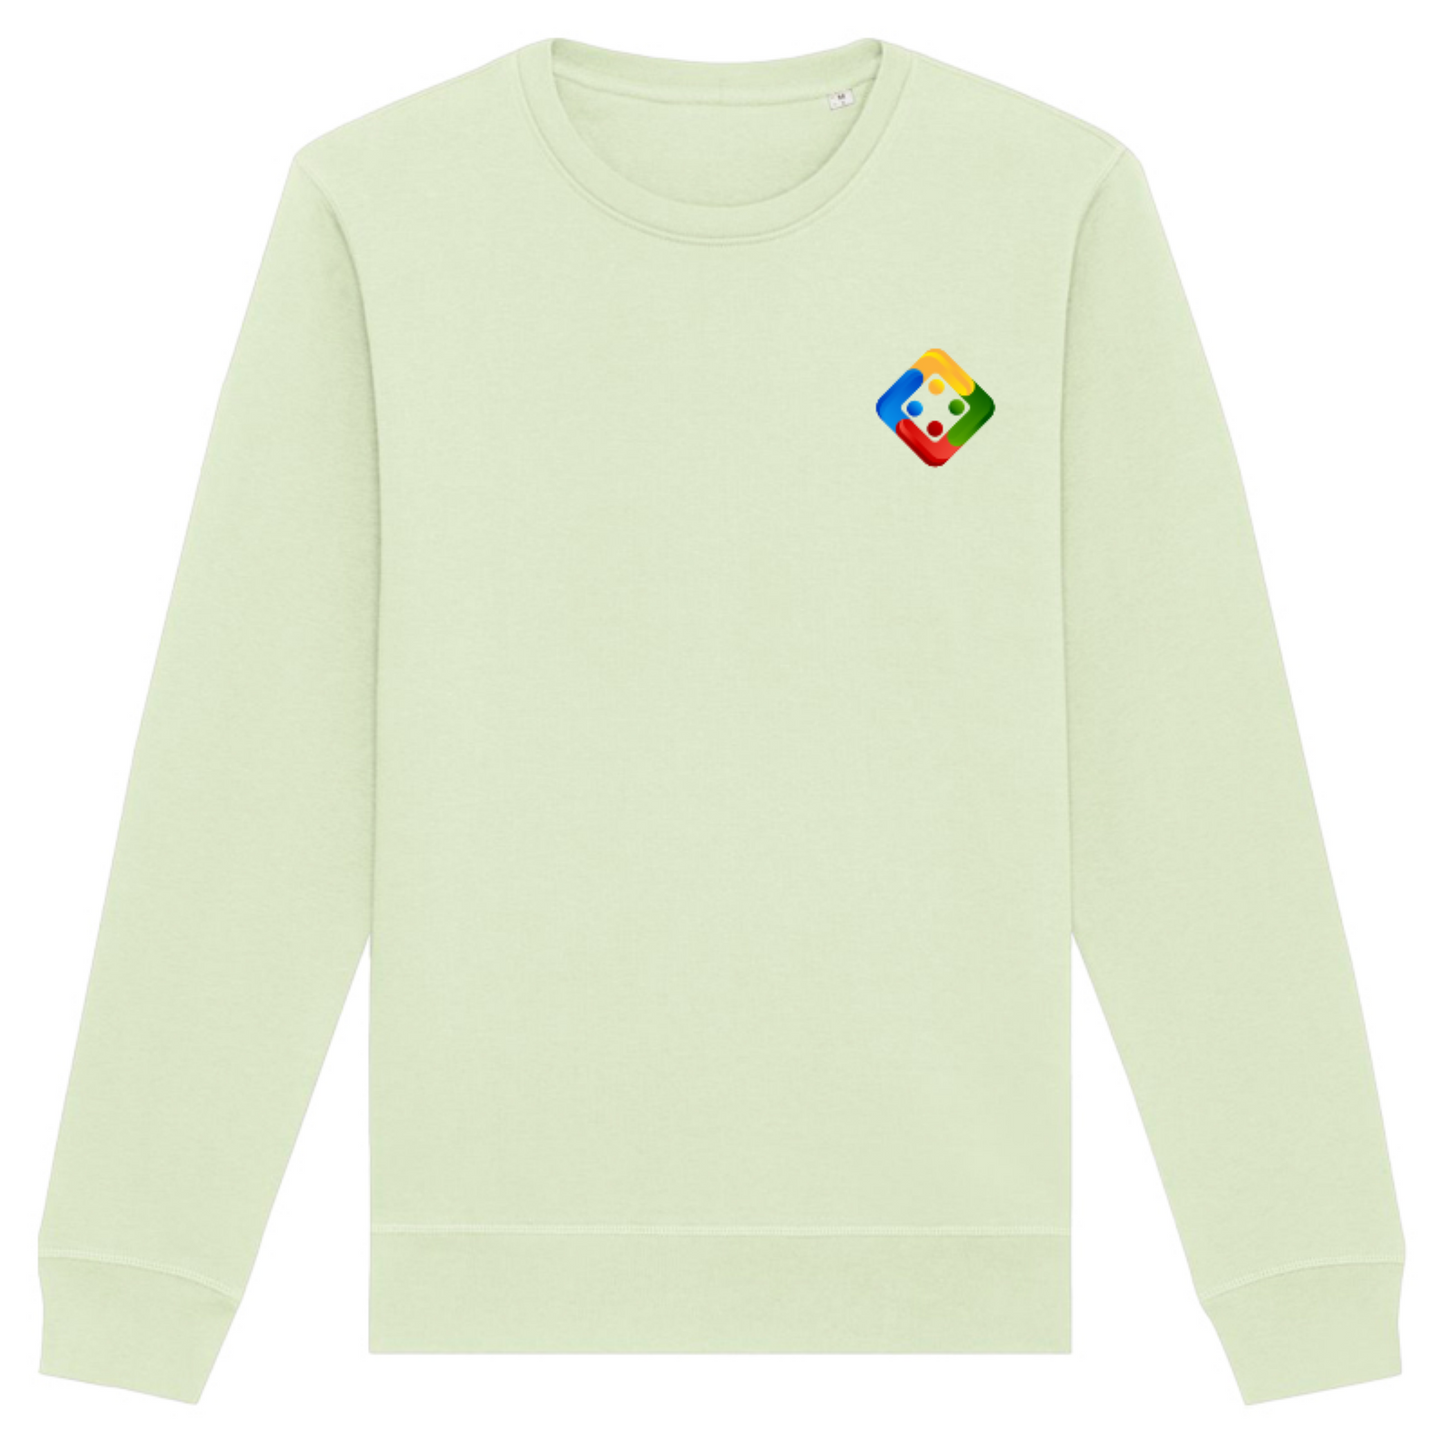 Unisex light coloured sweatshirt with embroidered Uckers emblem. Available in 5 colours.